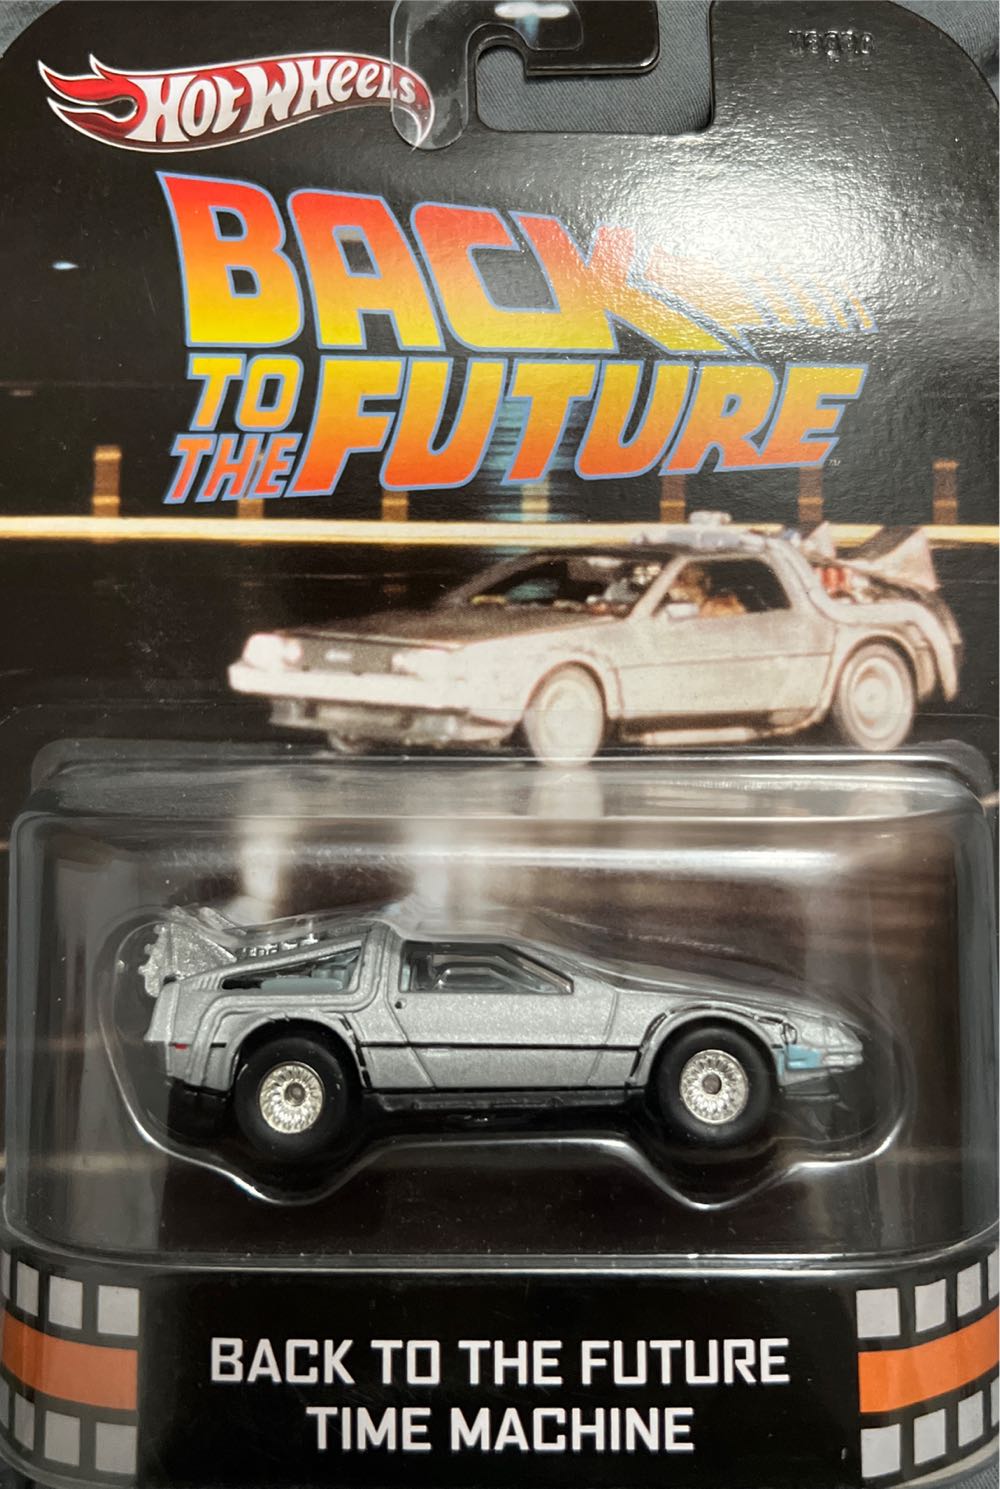 DeLorean-Back To The Future - Hot Wheels (Hot Wheels - Retro Entertainment) action figure collectible [Barcode 746775175641] - Main Image 1